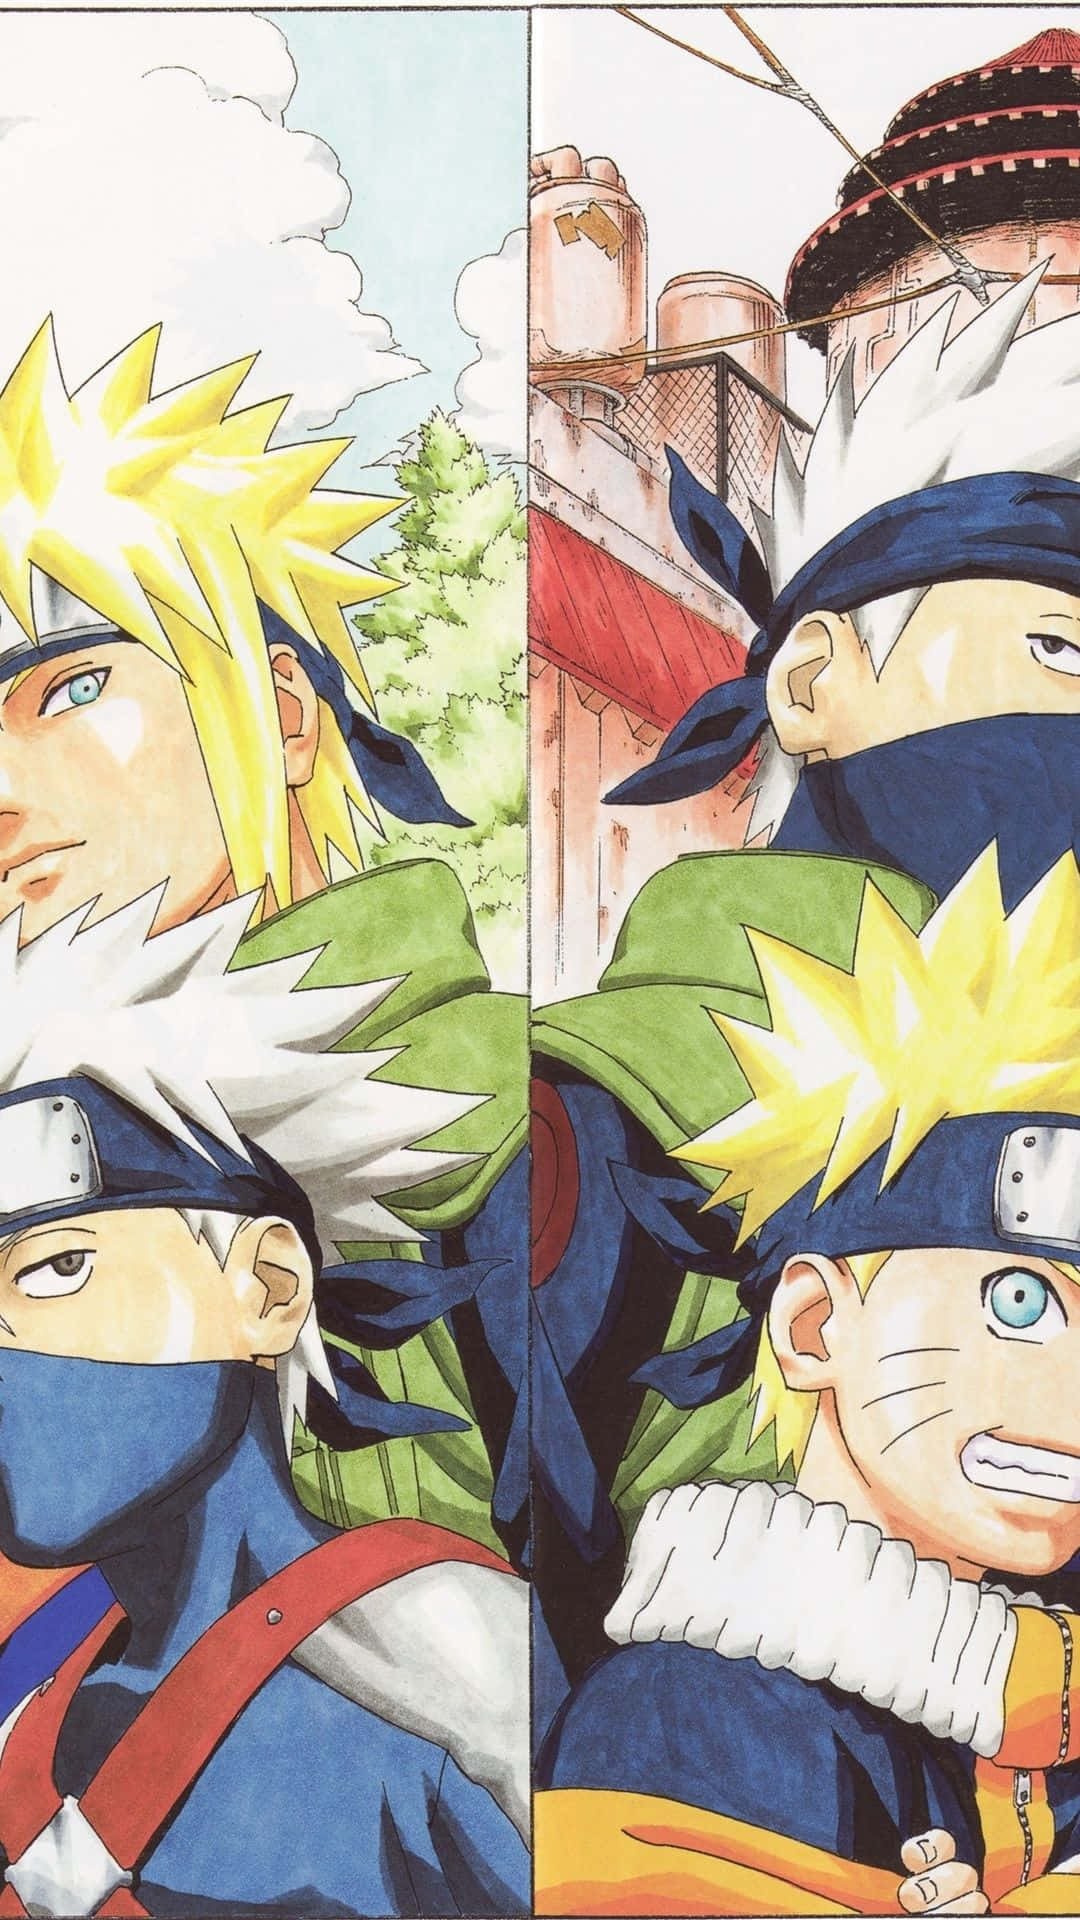 "Kakashi and Obito – two students of the Second Hokage and the strongest shinobi of their era" Wallpaper